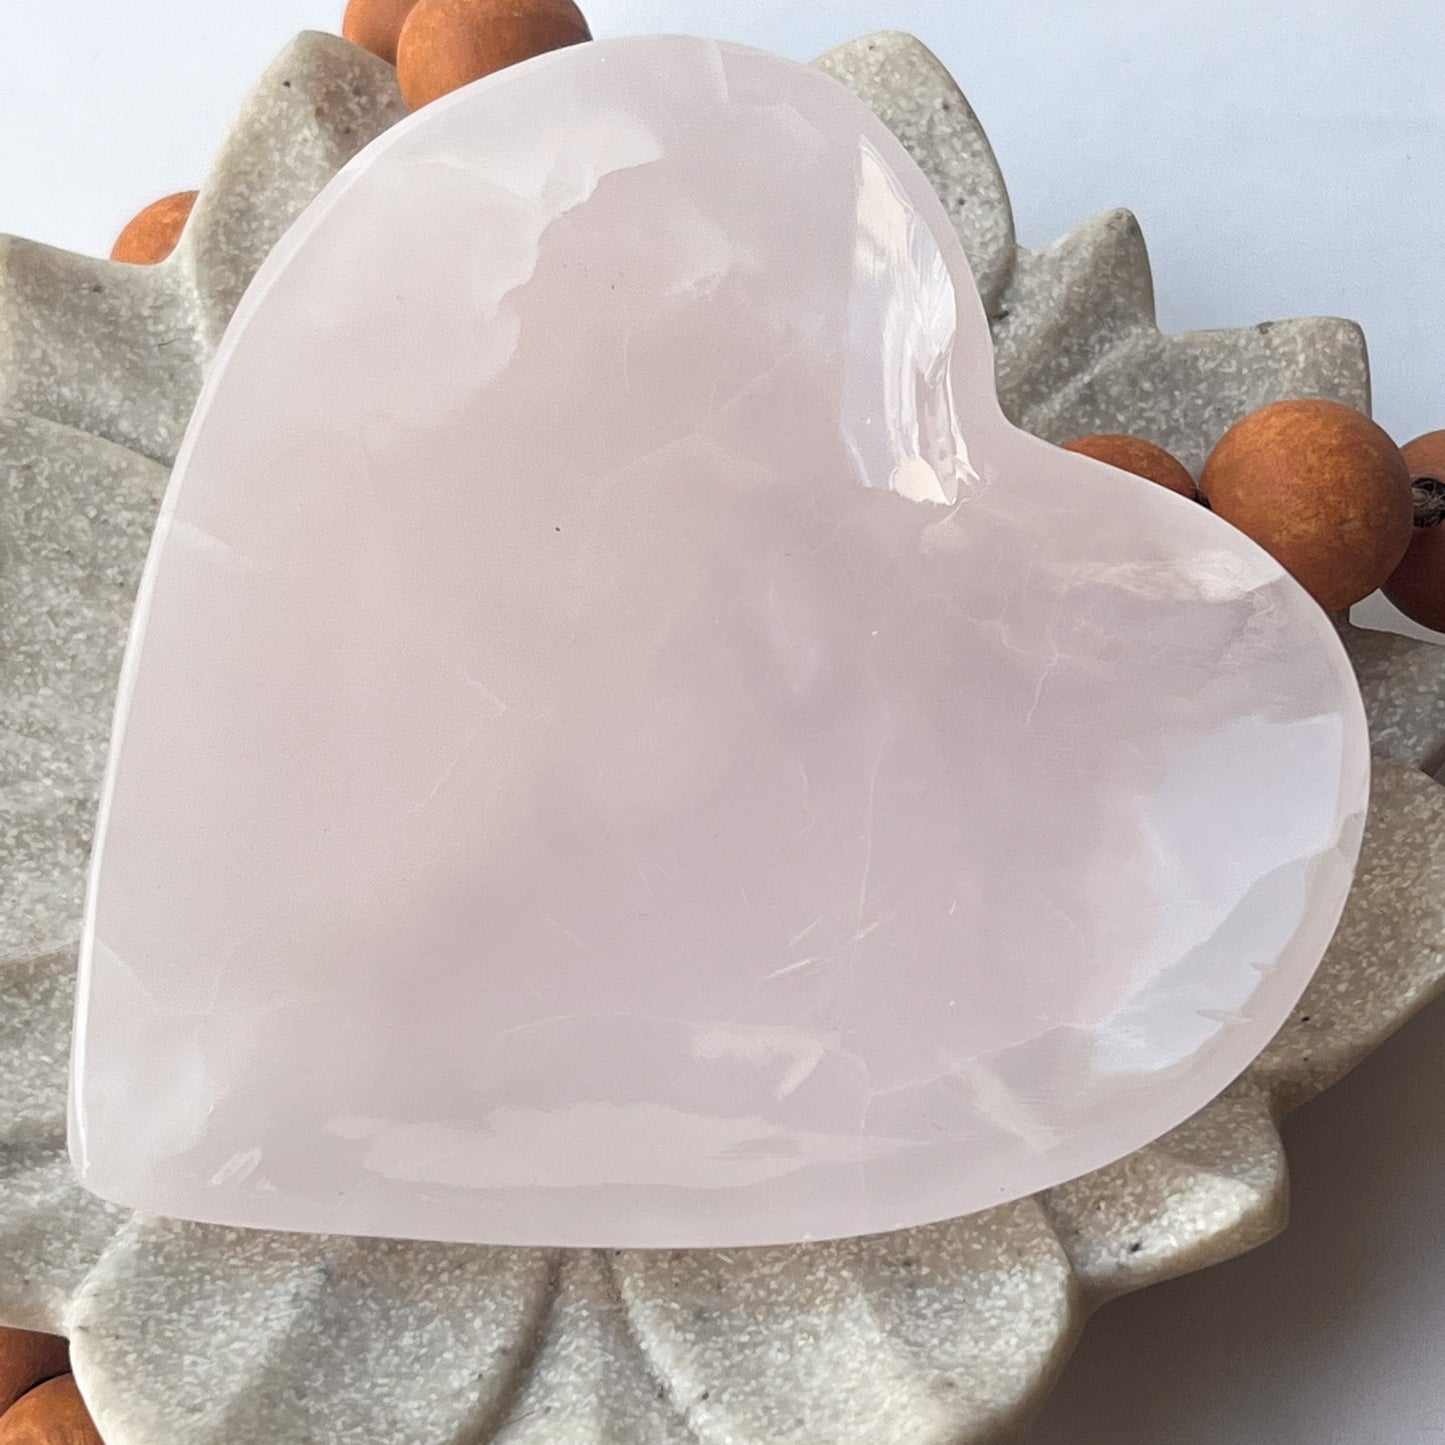 Polished Crystal Shape - Pink Calcite Heart Plate 10cm